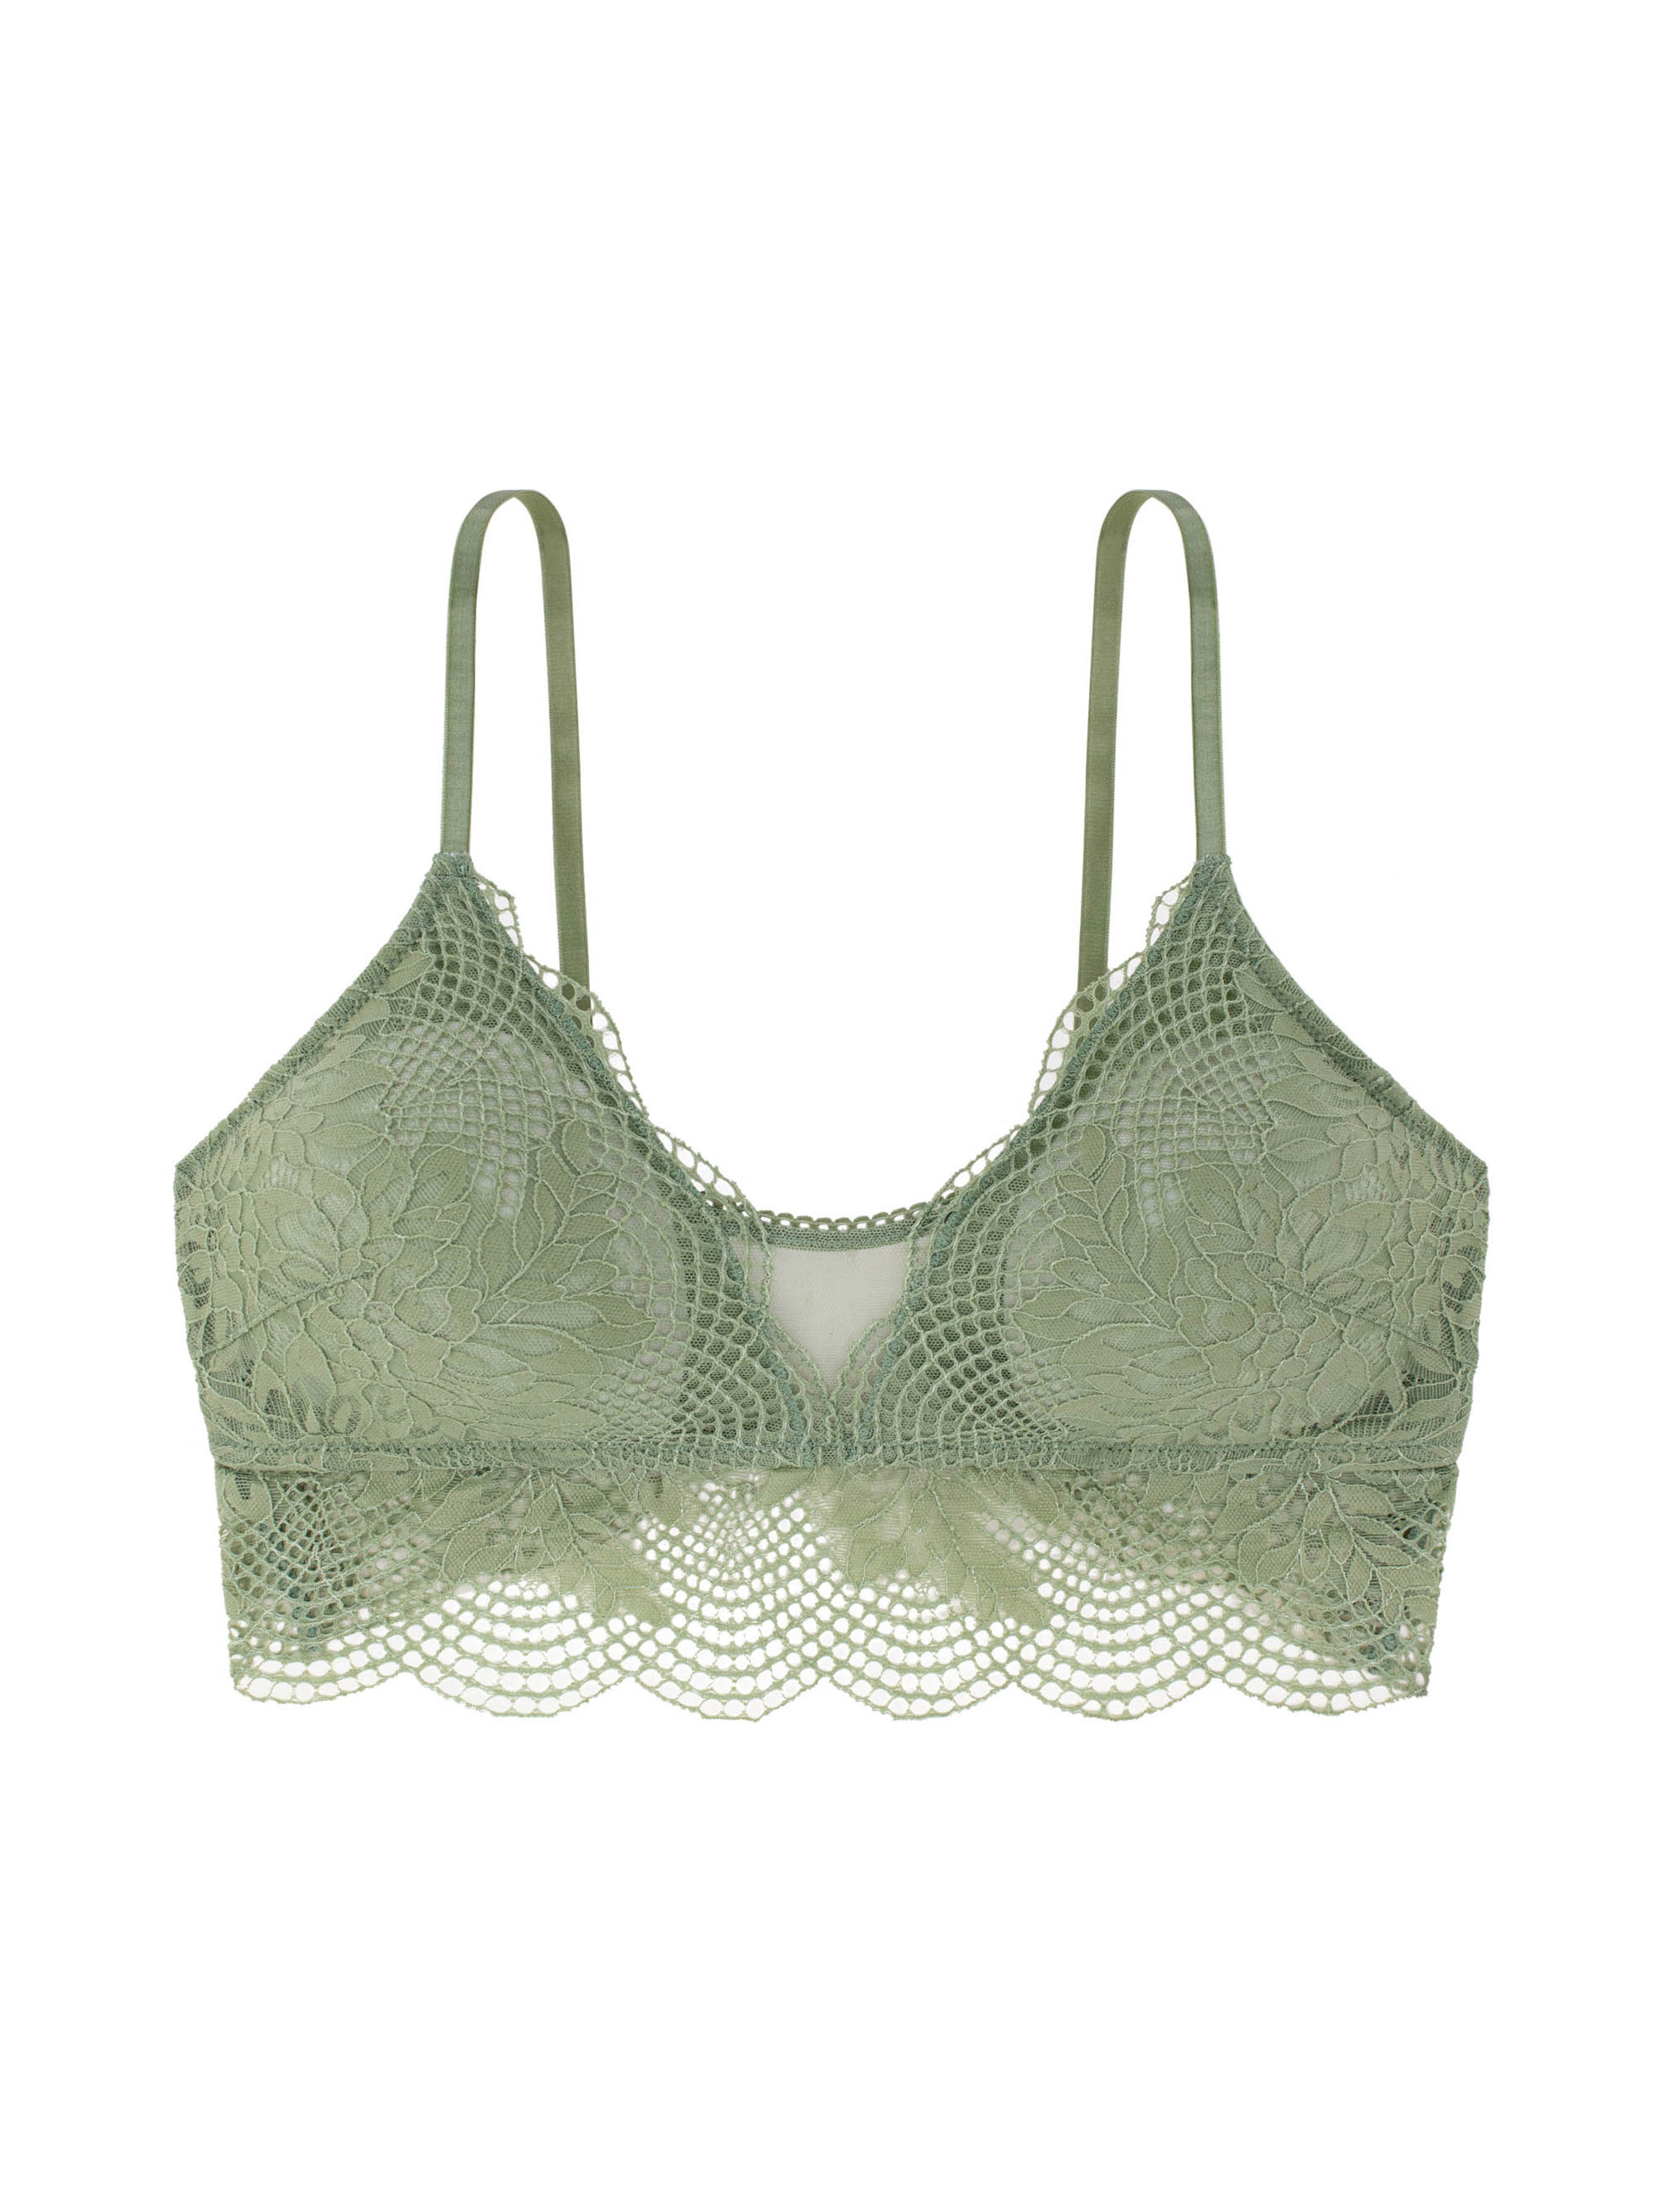 Micro Bralettes for Women - Removable Bra Pads